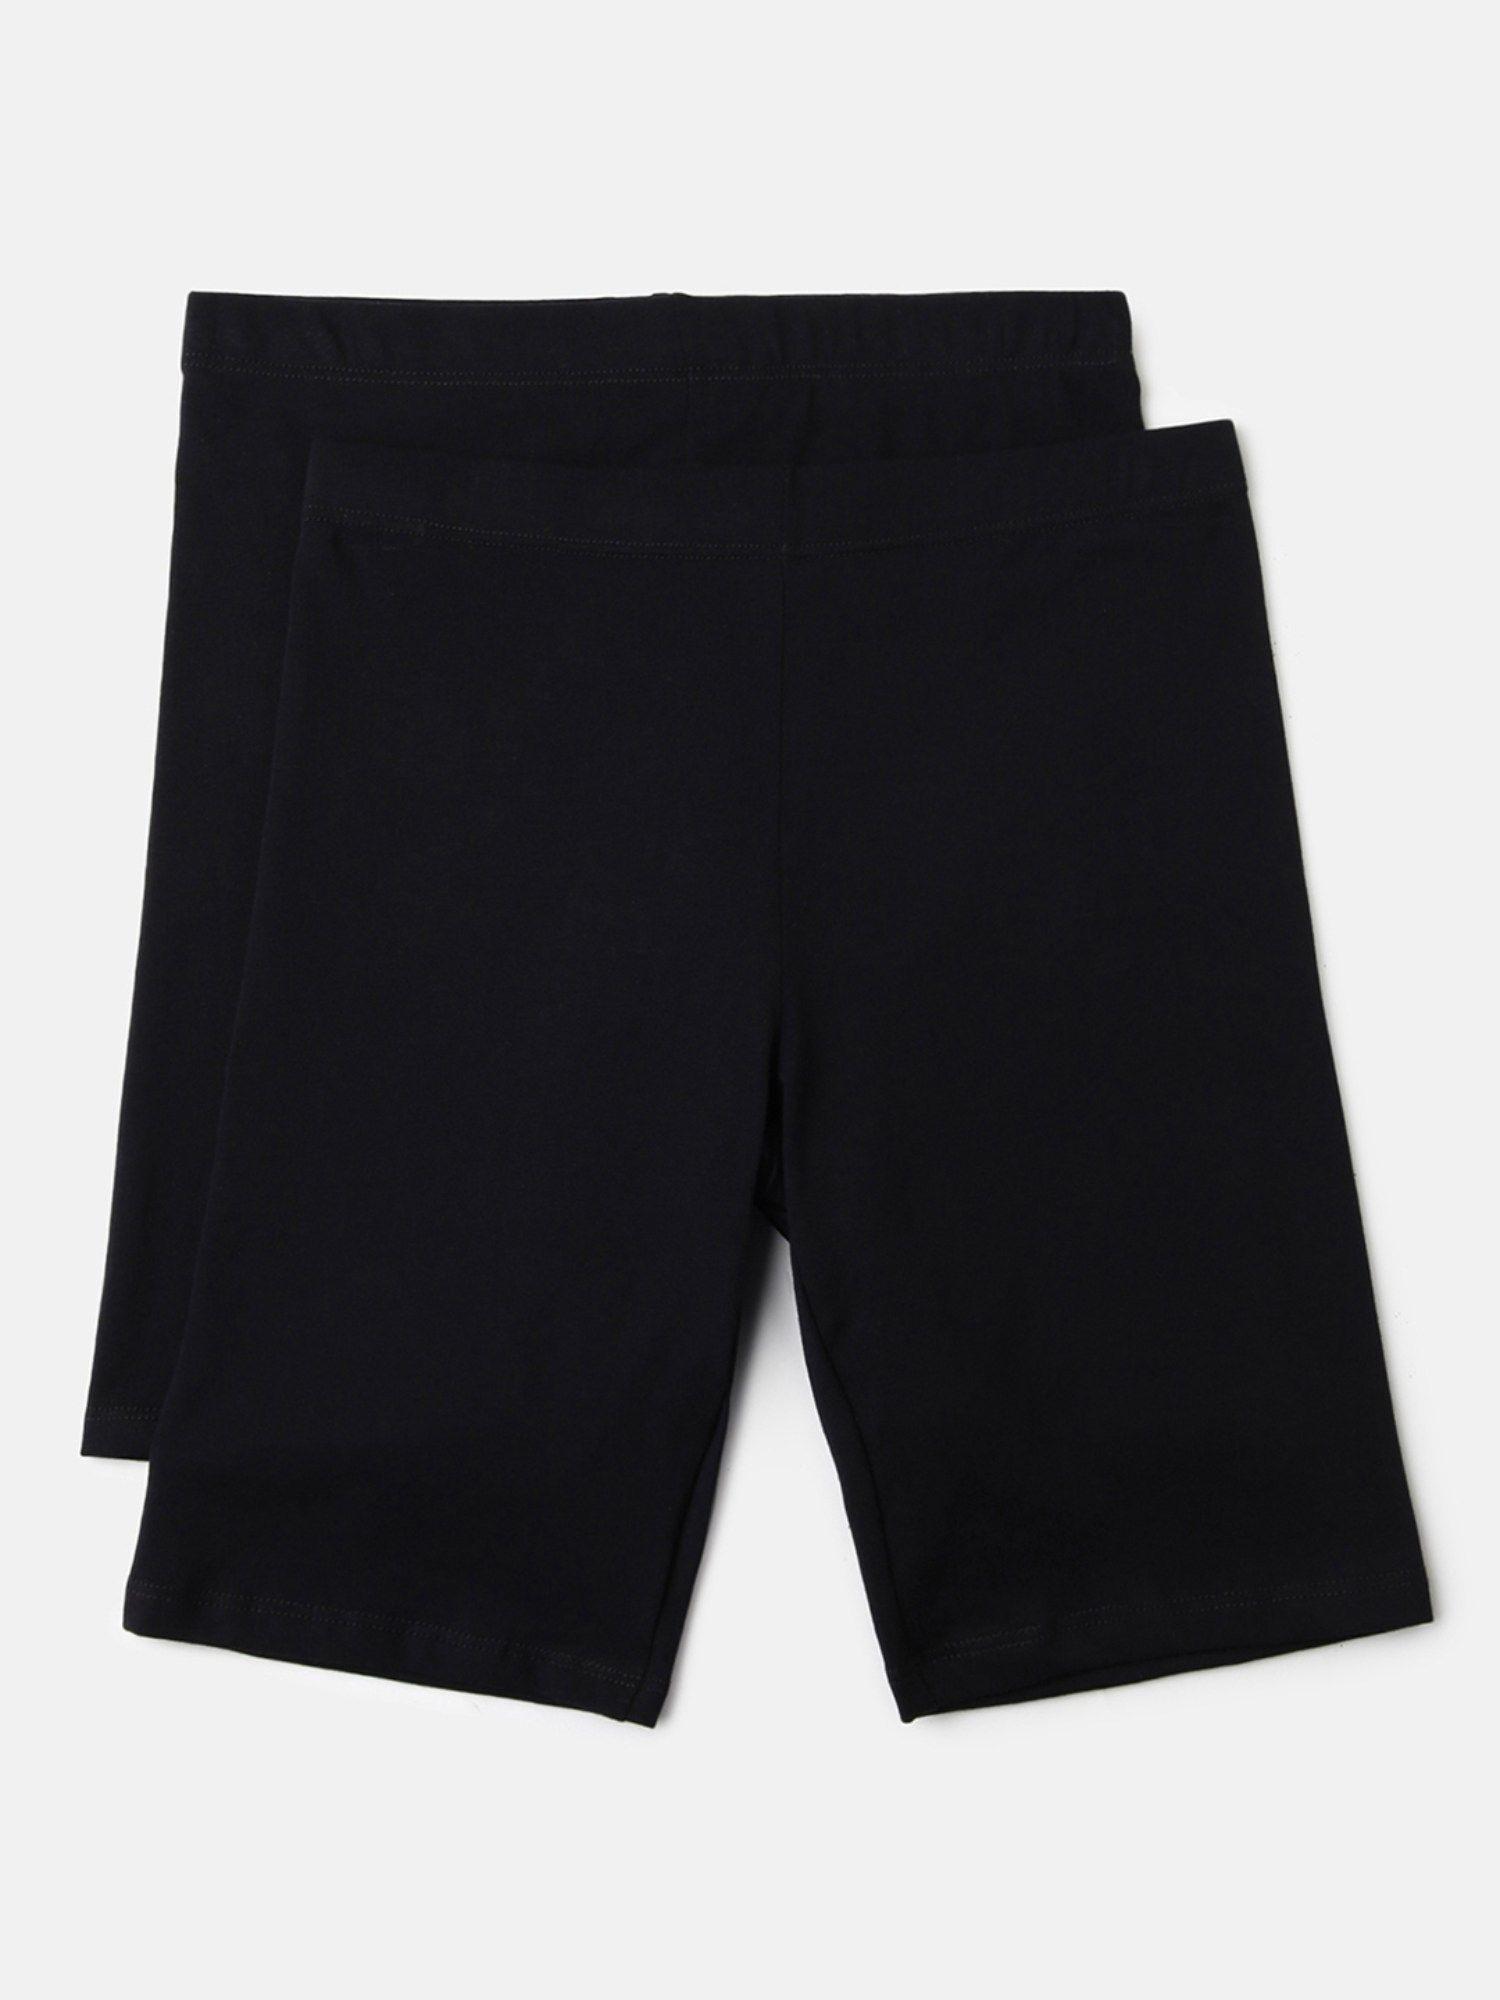 solid colour low rise bermuda shorts (pack of 2)